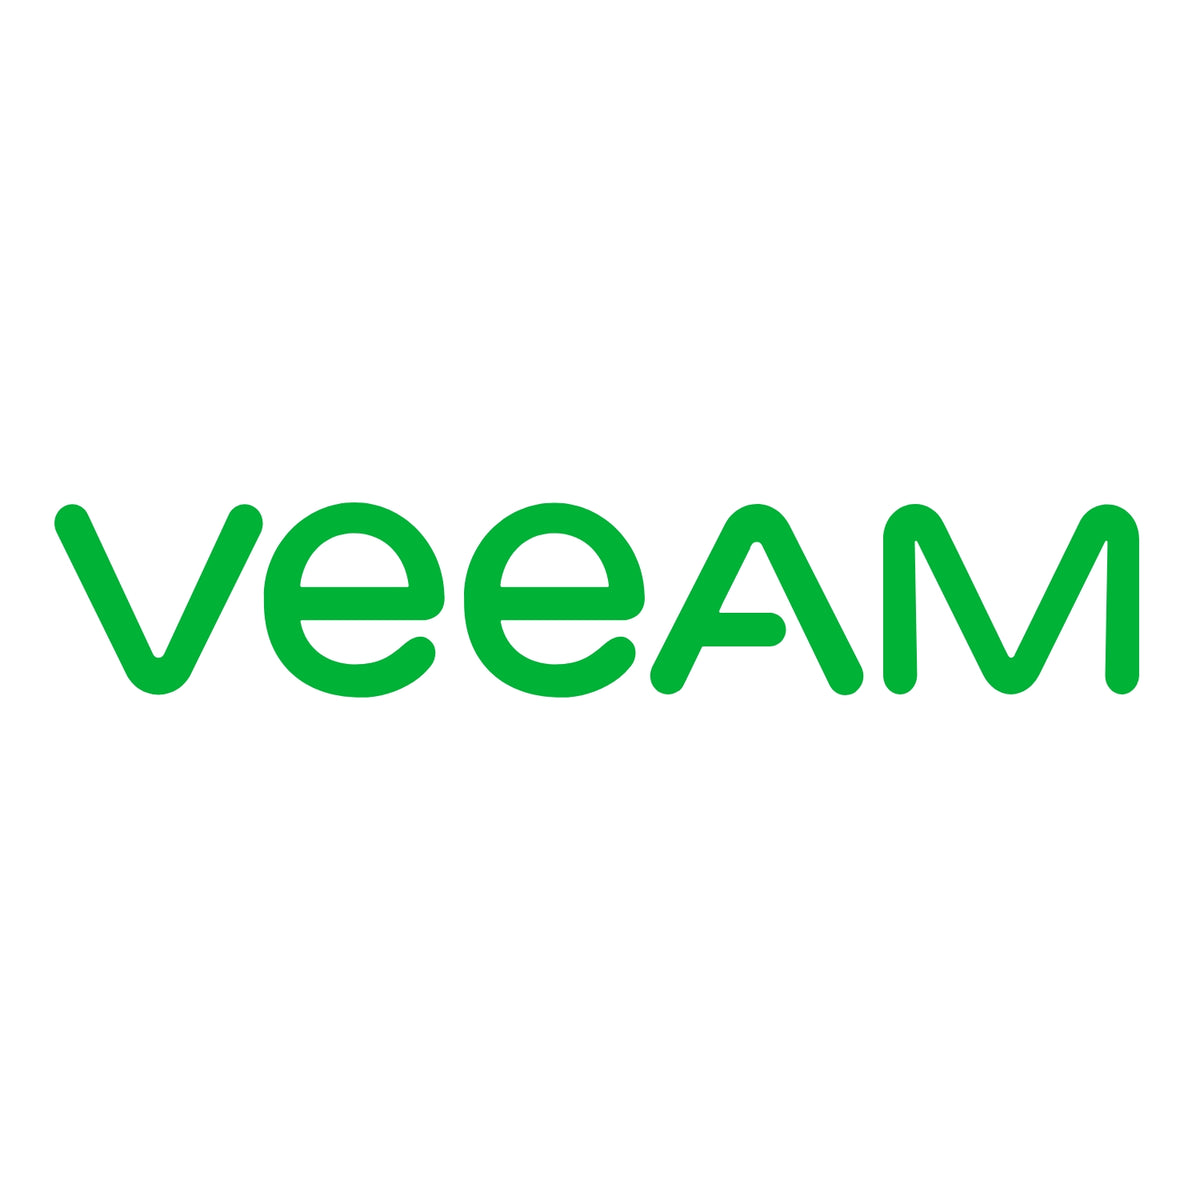 Veeam - Global Leader in Data Protection and Ransomware Recovery